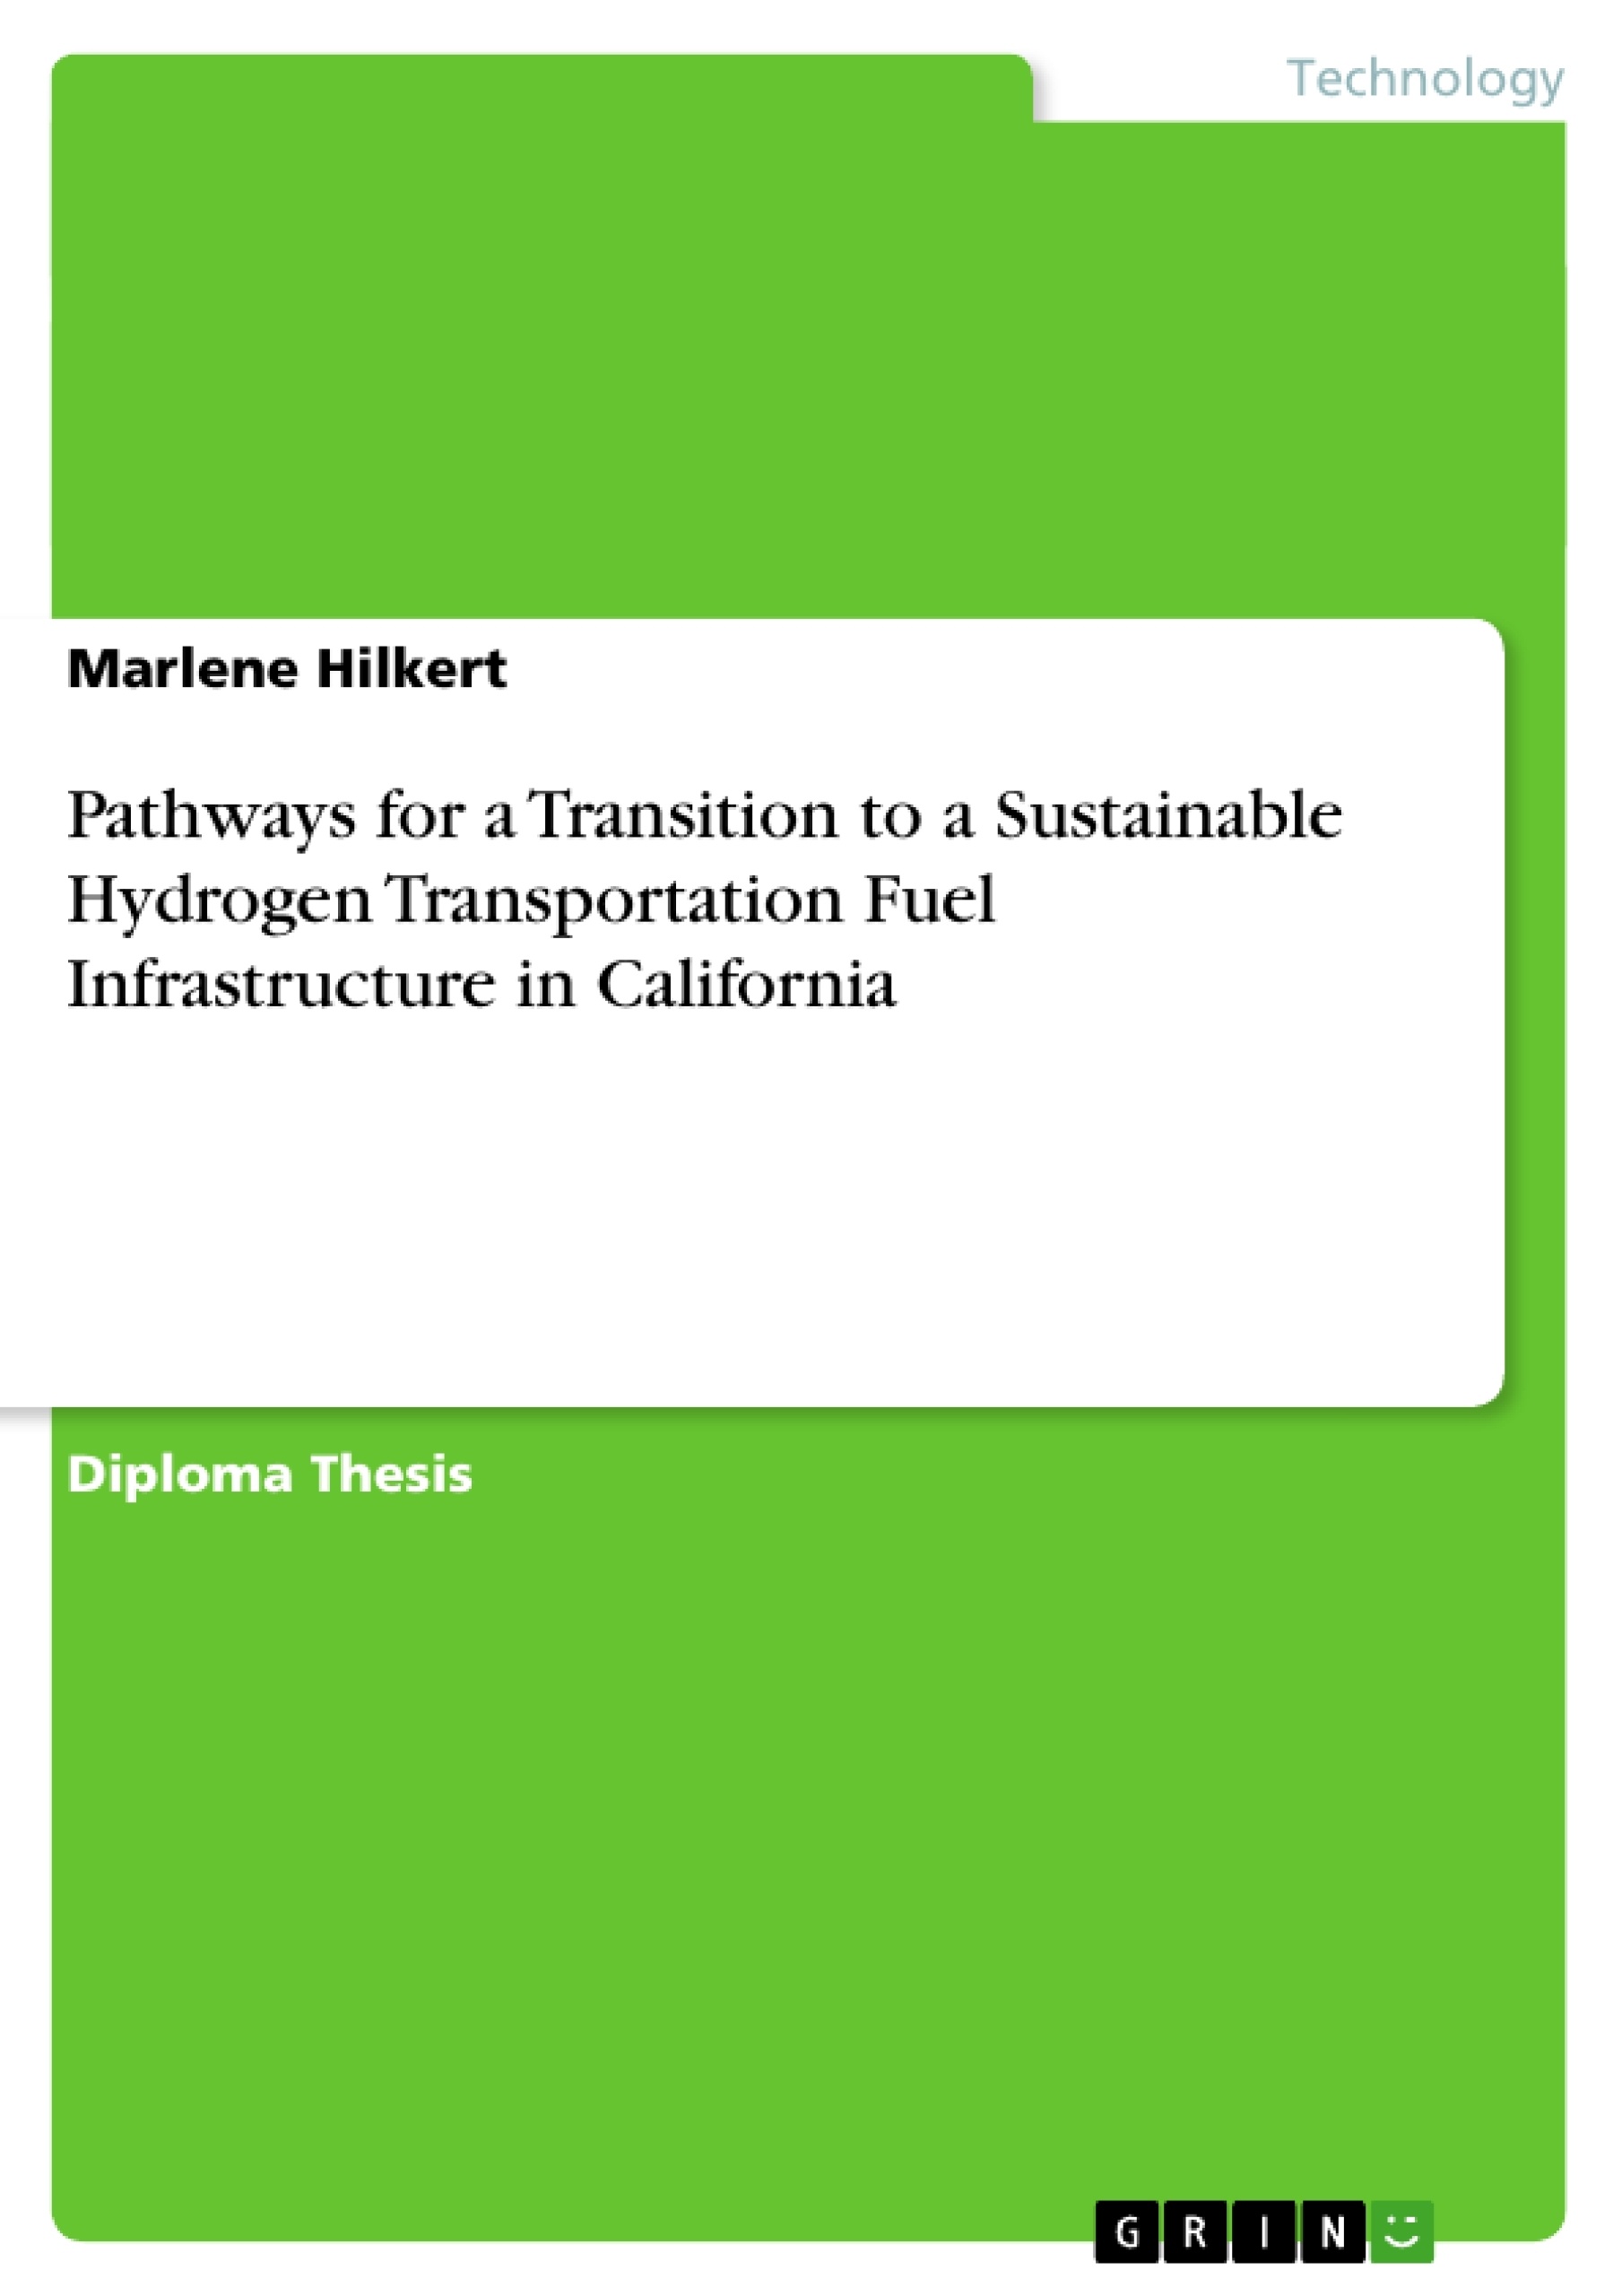 Title: Pathways for a Transition to a Sustainable Hydrogen Transportation Fuel Infrastructure in California